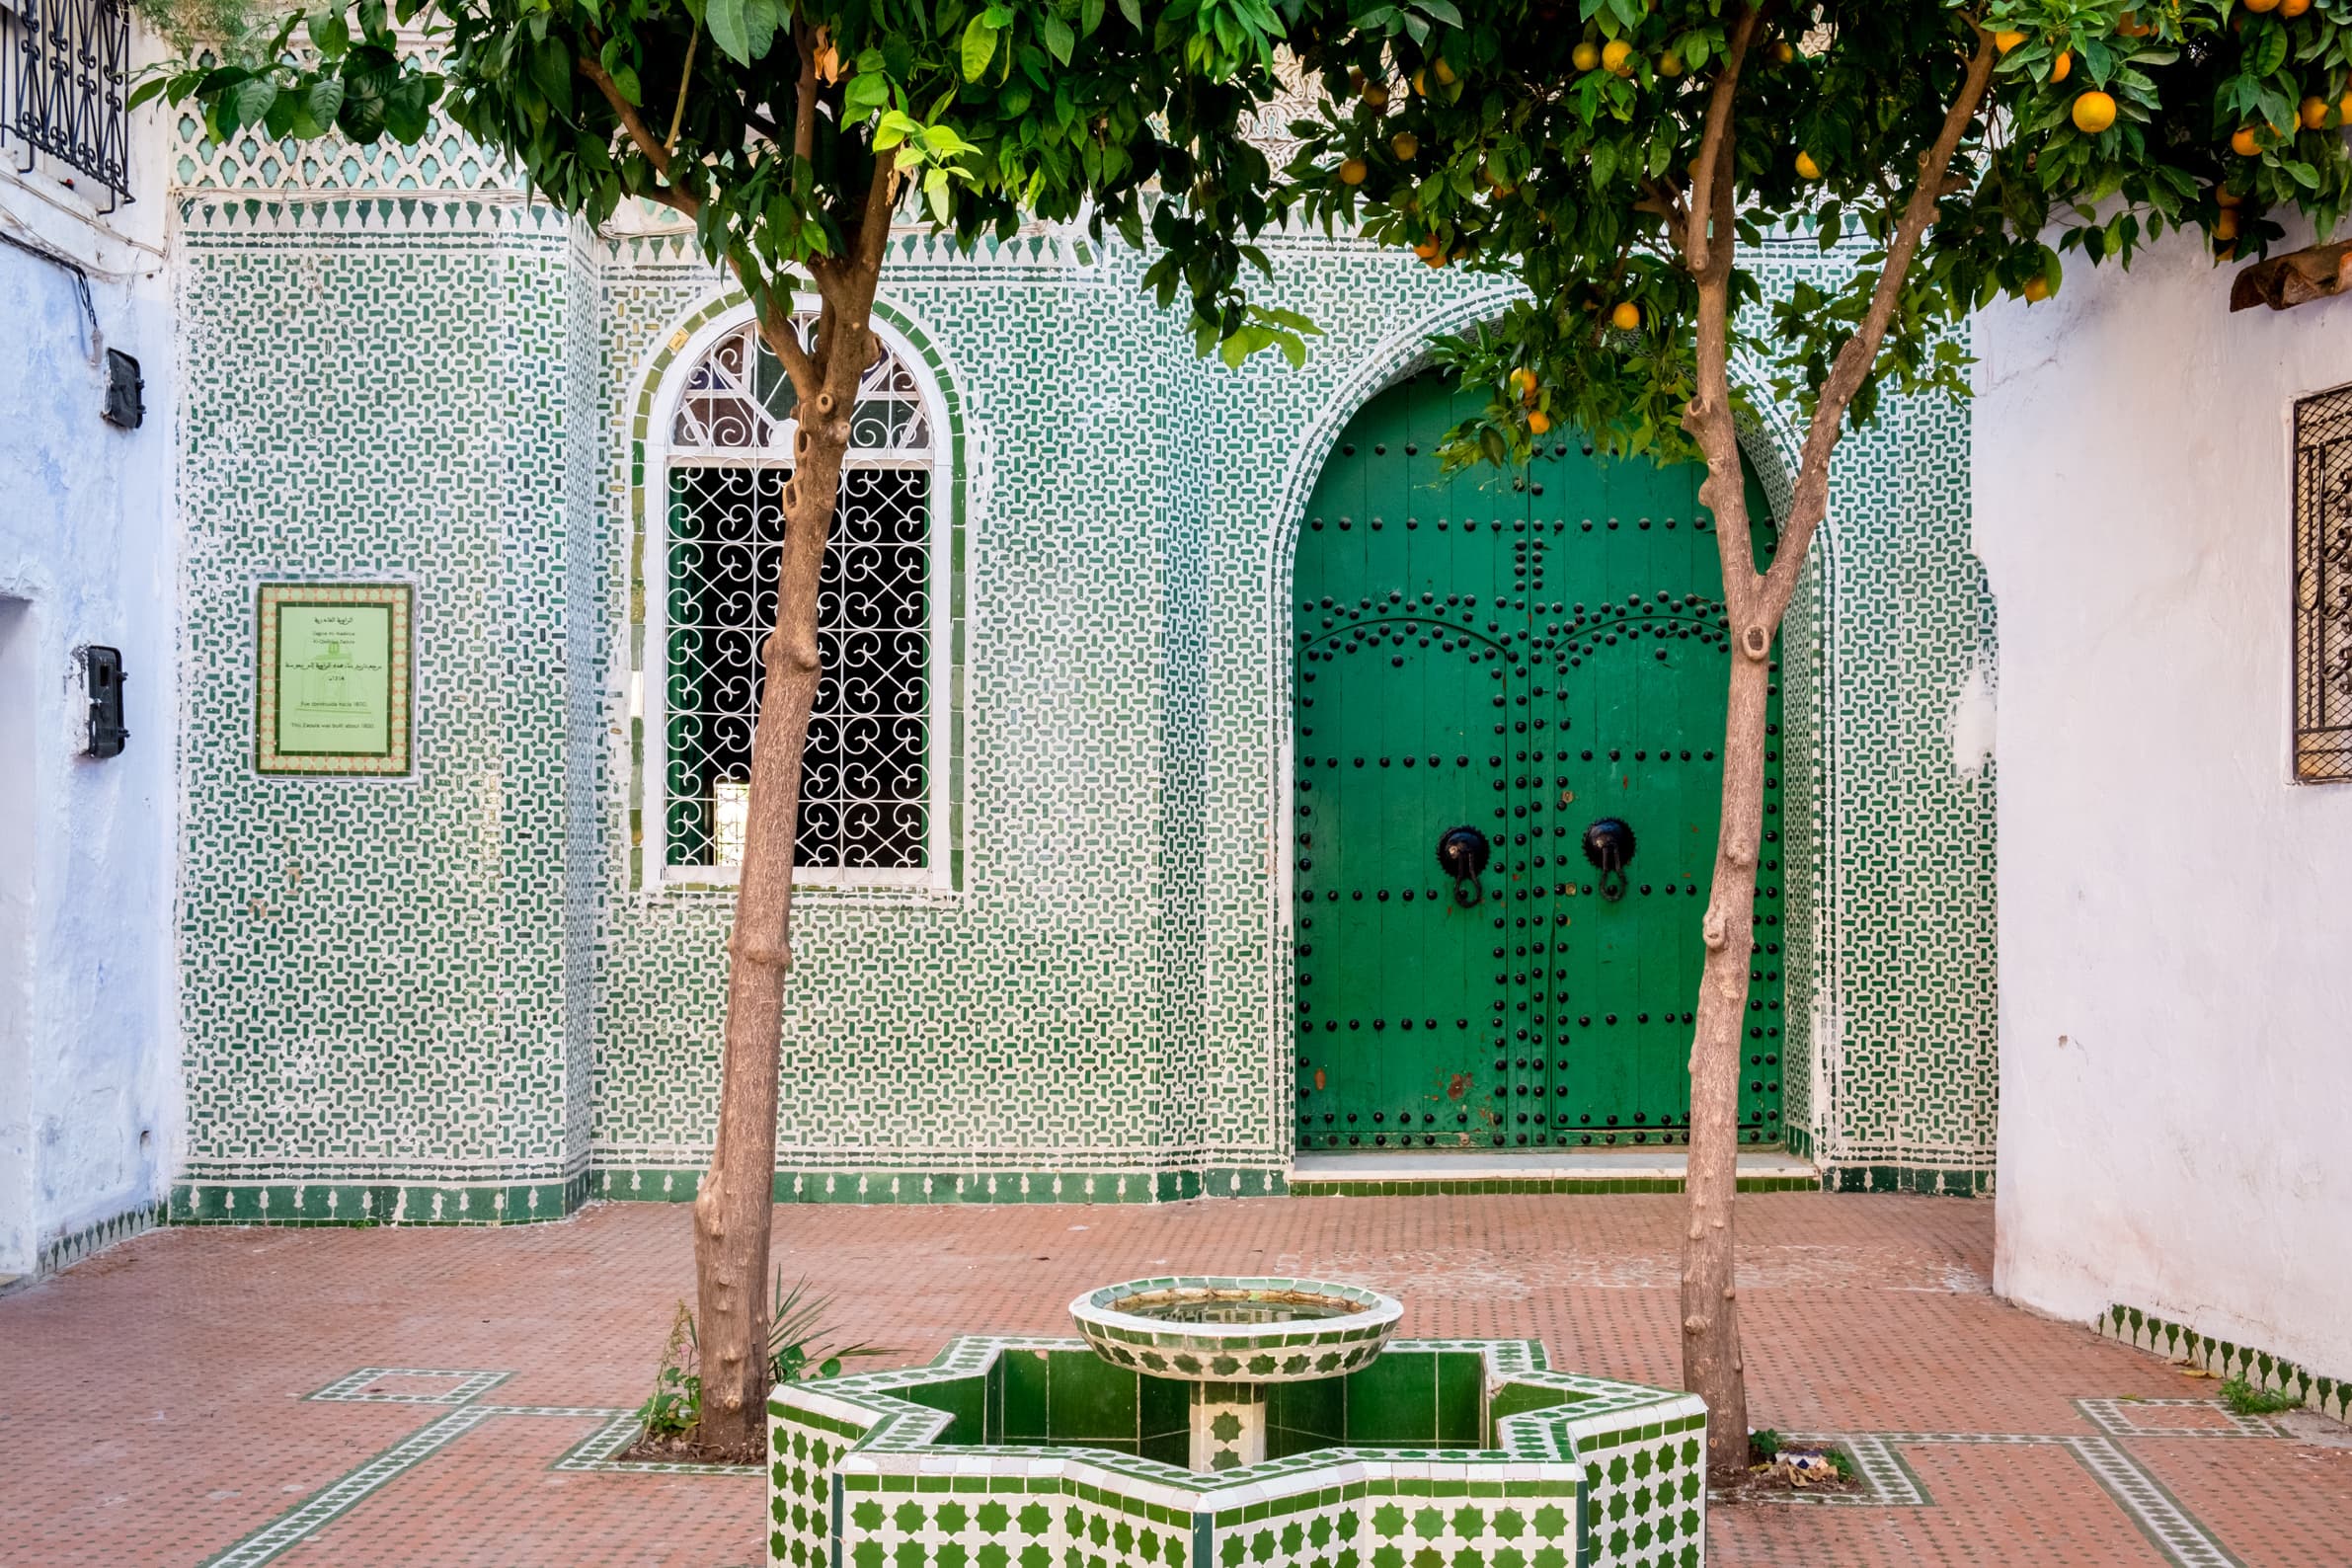 A green corner in Chefchaouen, Morocco